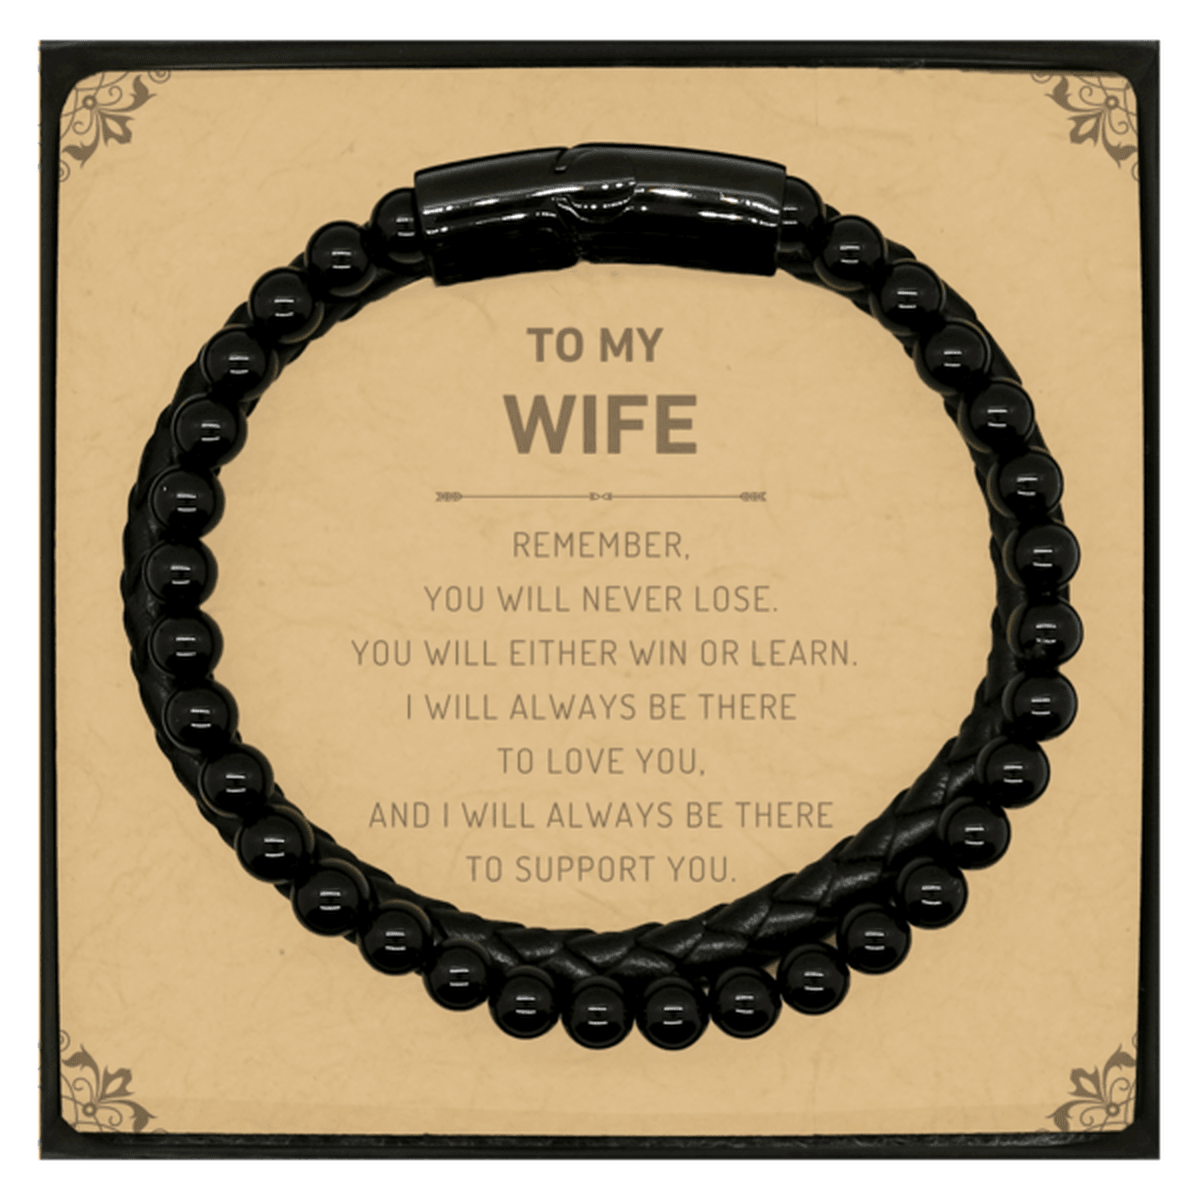 Wife Gifts, To My Wife Remember, you will never lose. You will either WIN or LEARN, Keepsake Stone Leather Bracelets For Wife Card, Birthday Christmas Gifts Ideas For Wife X-mas Gifts - Mallard Moon Gift Shop